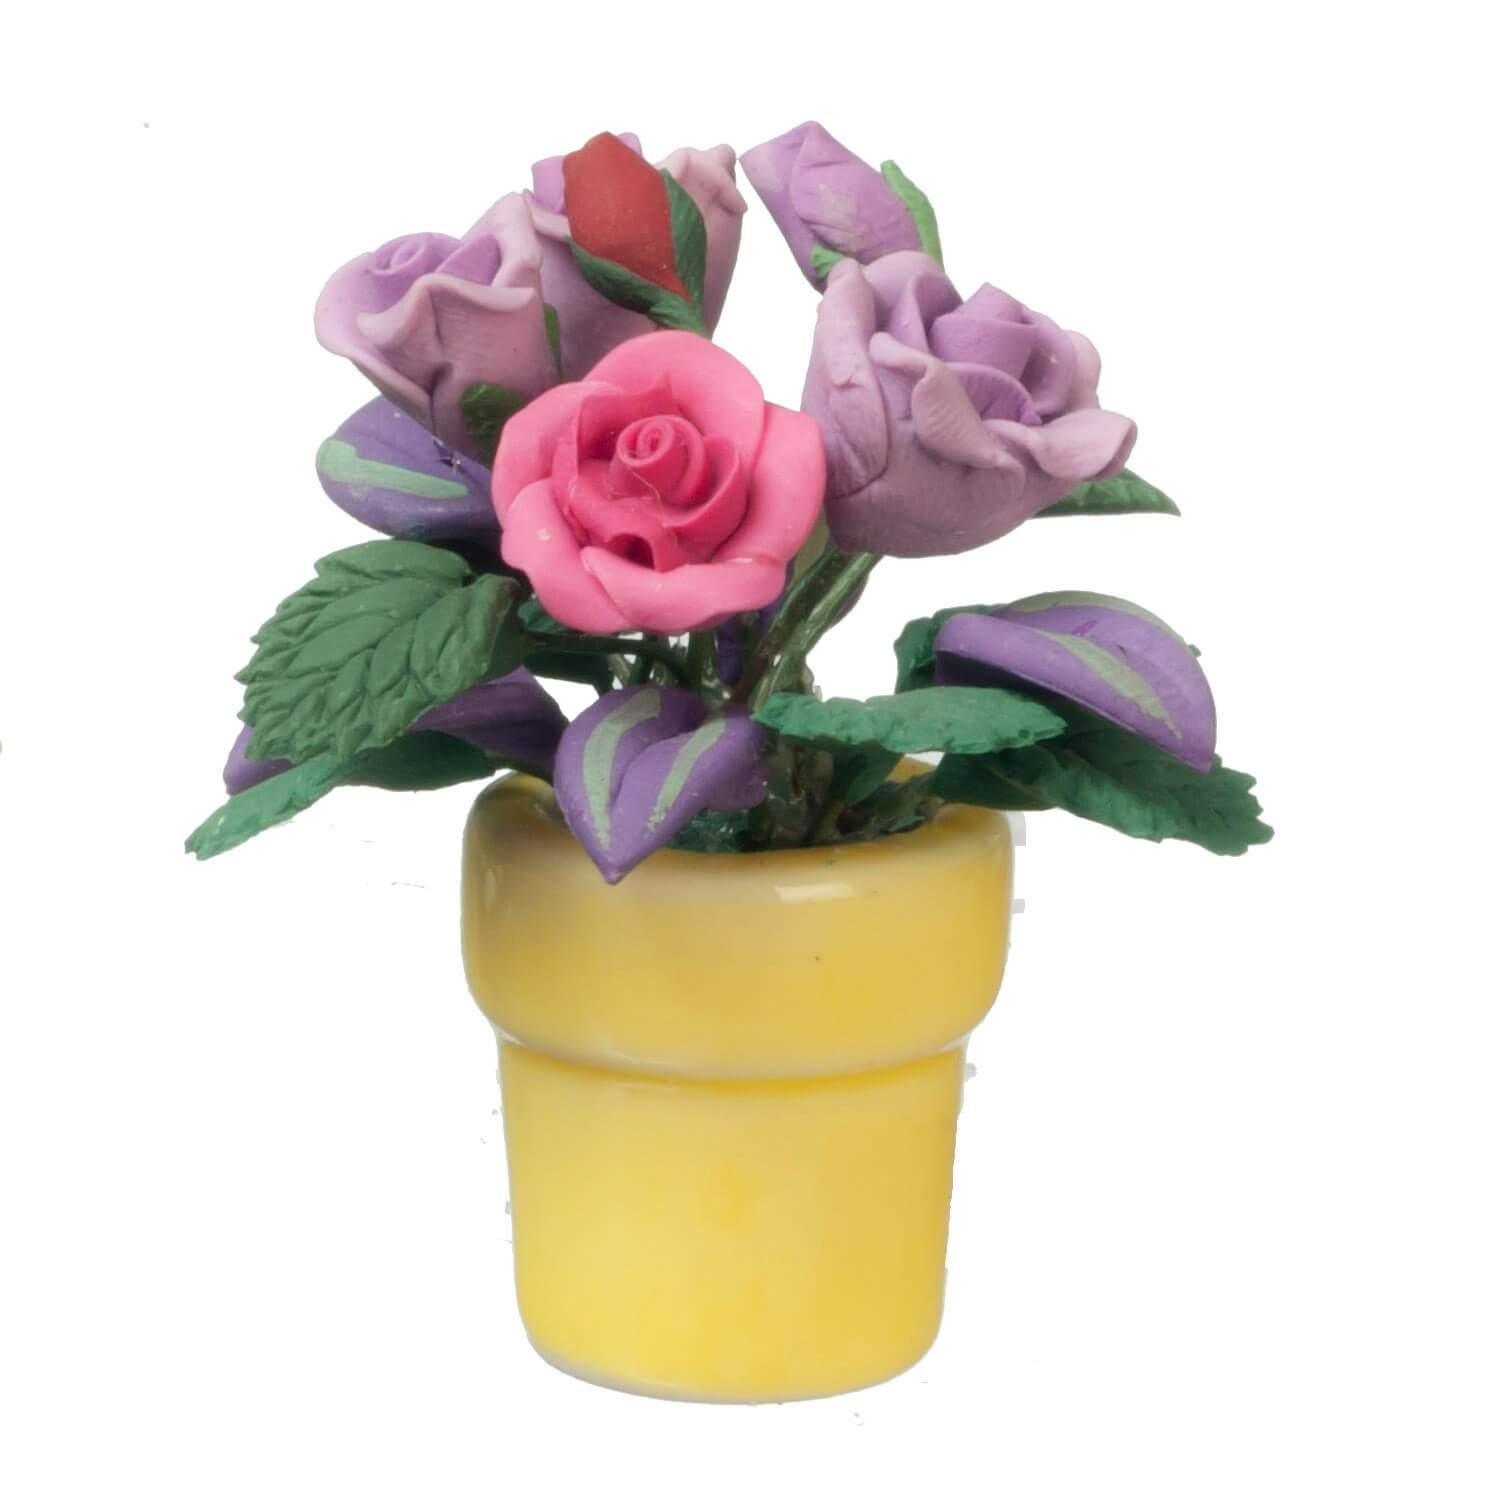 Violet & Pink Roses in a Yellow Pot